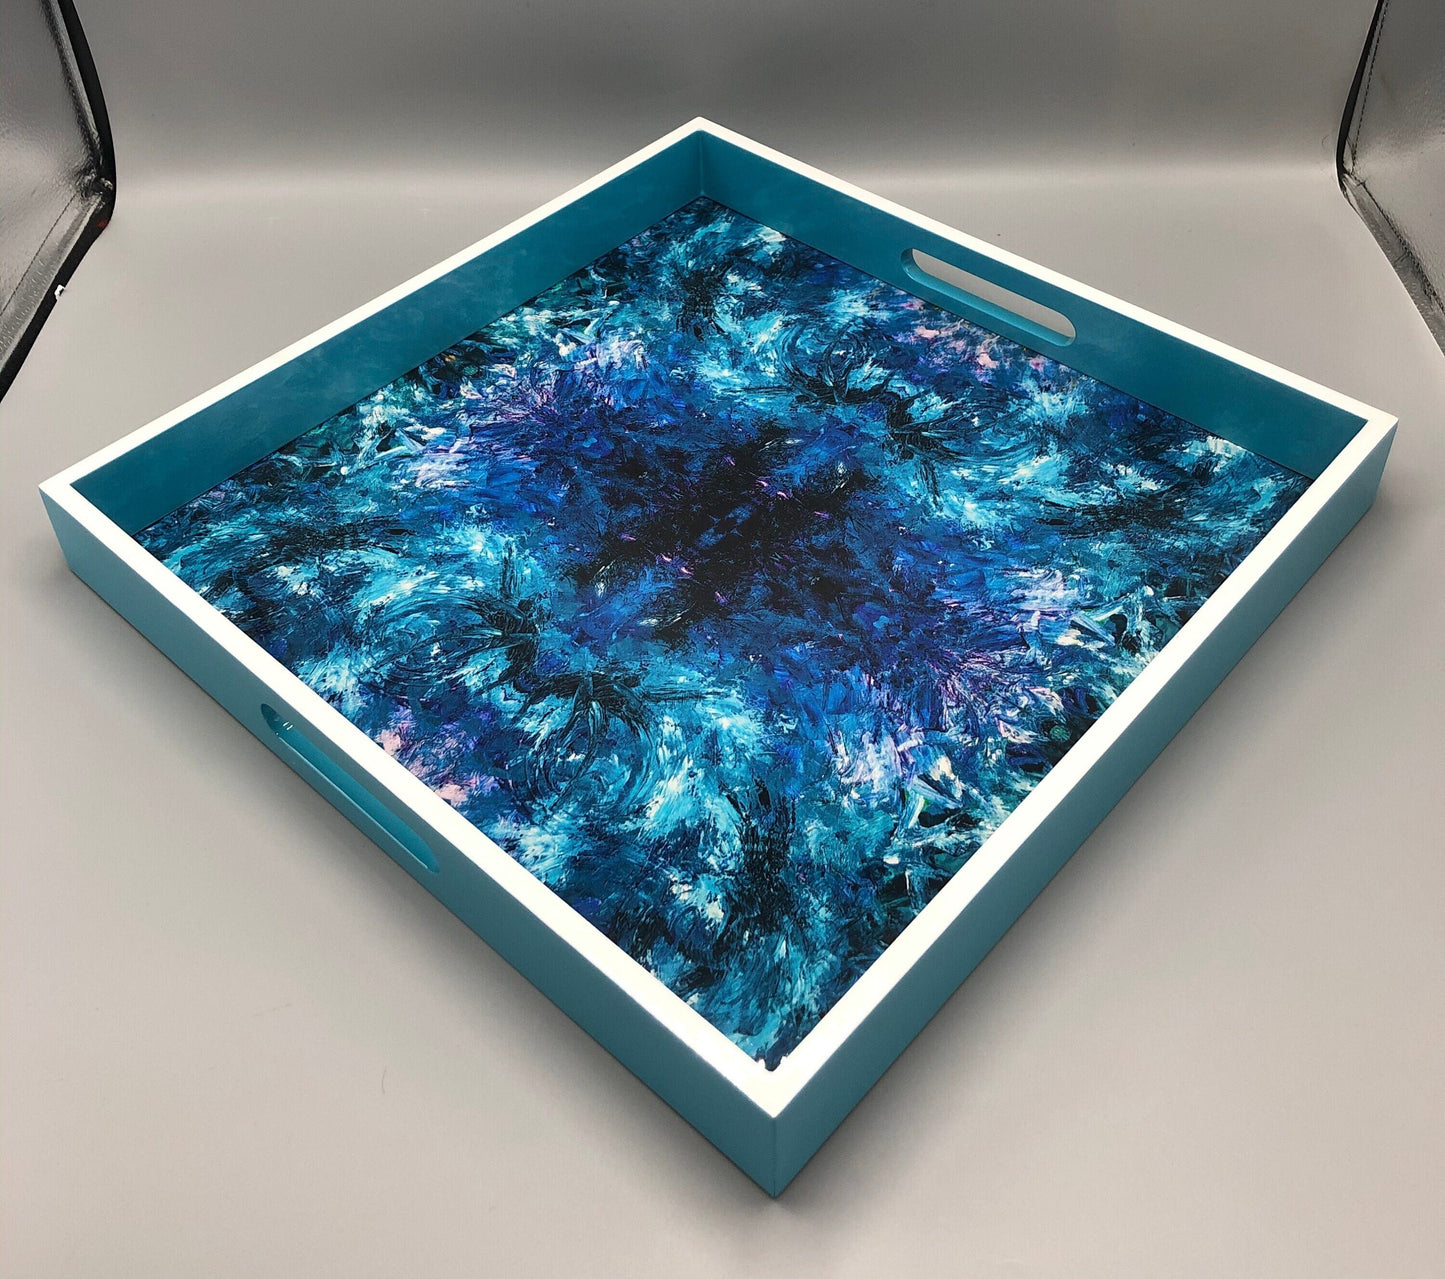 Handmade contemporary lacquer wood tray titled: “Blue Ocean” designed by “Magic Hill W16 x D16 x H2